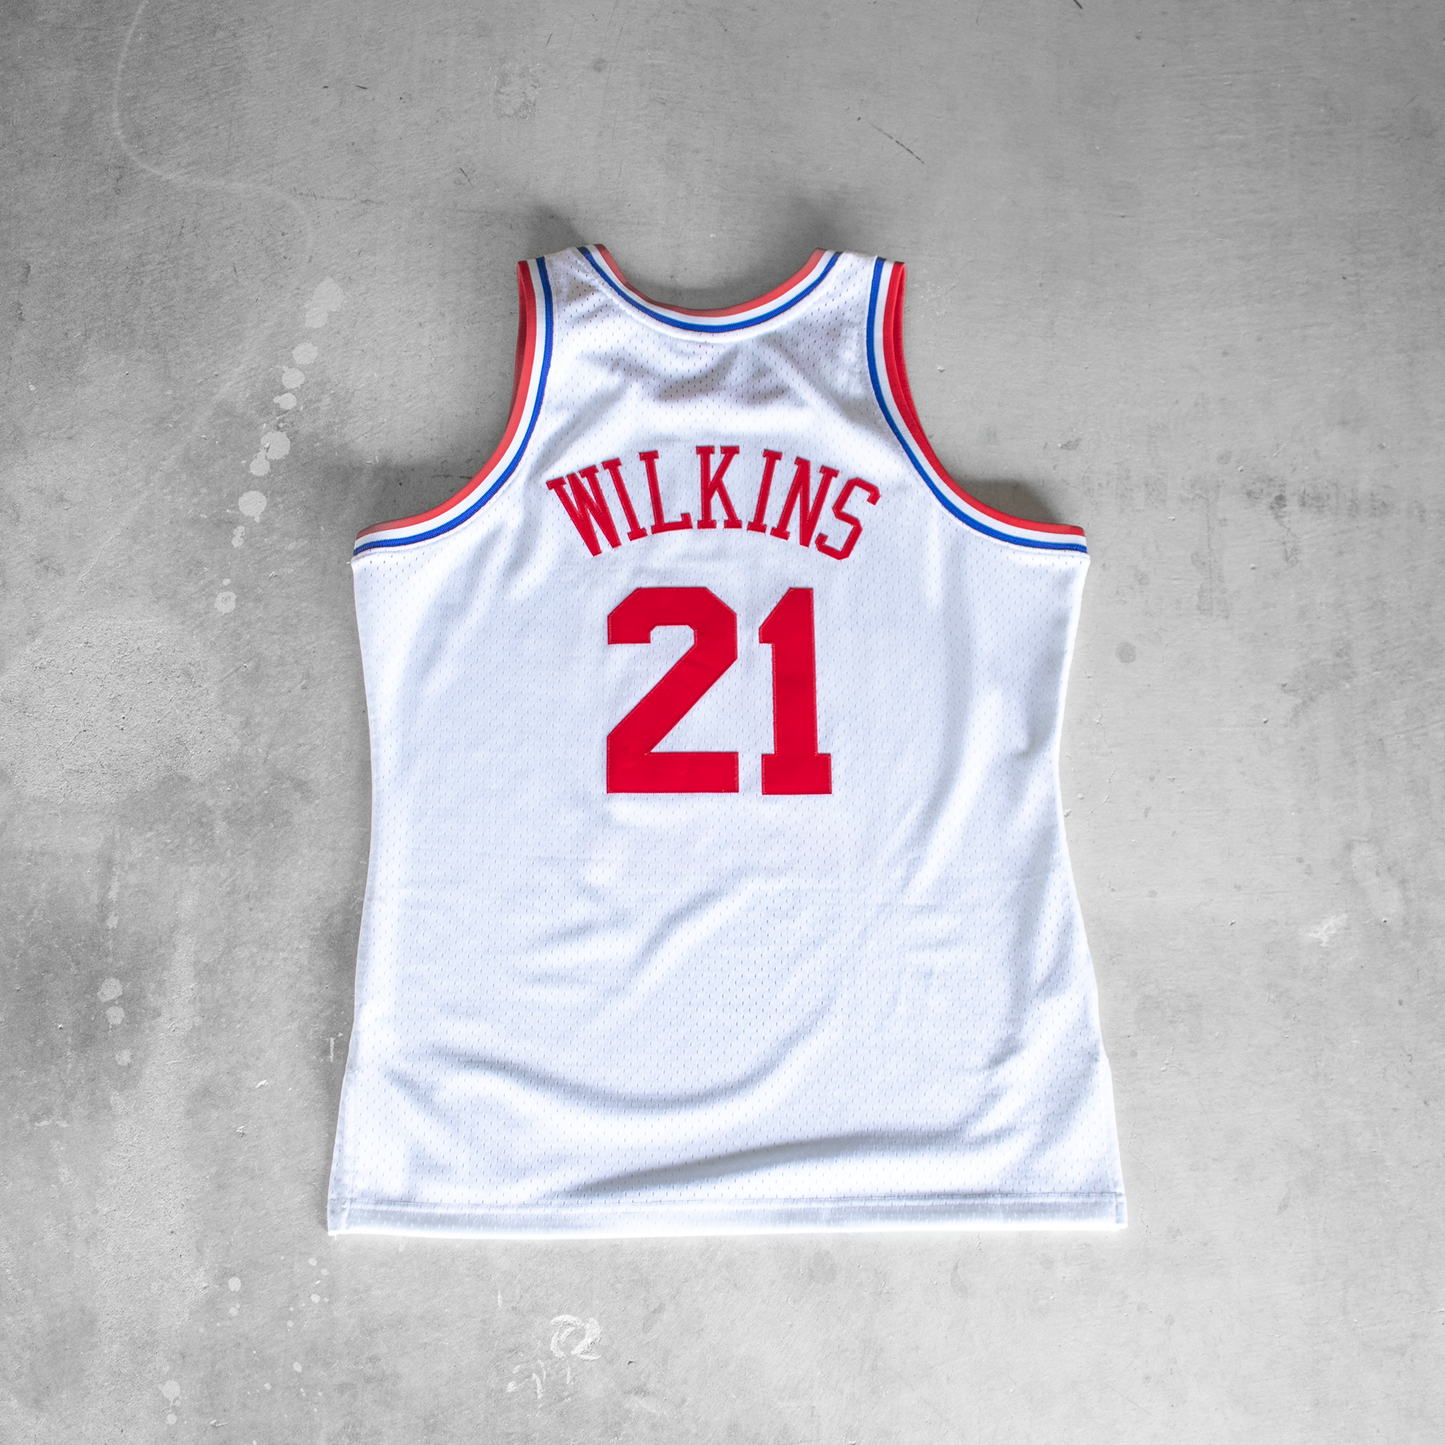 Mitchell & Ness NBA All Stars Dominique Wilkins #21 Basketball Jersey (L)